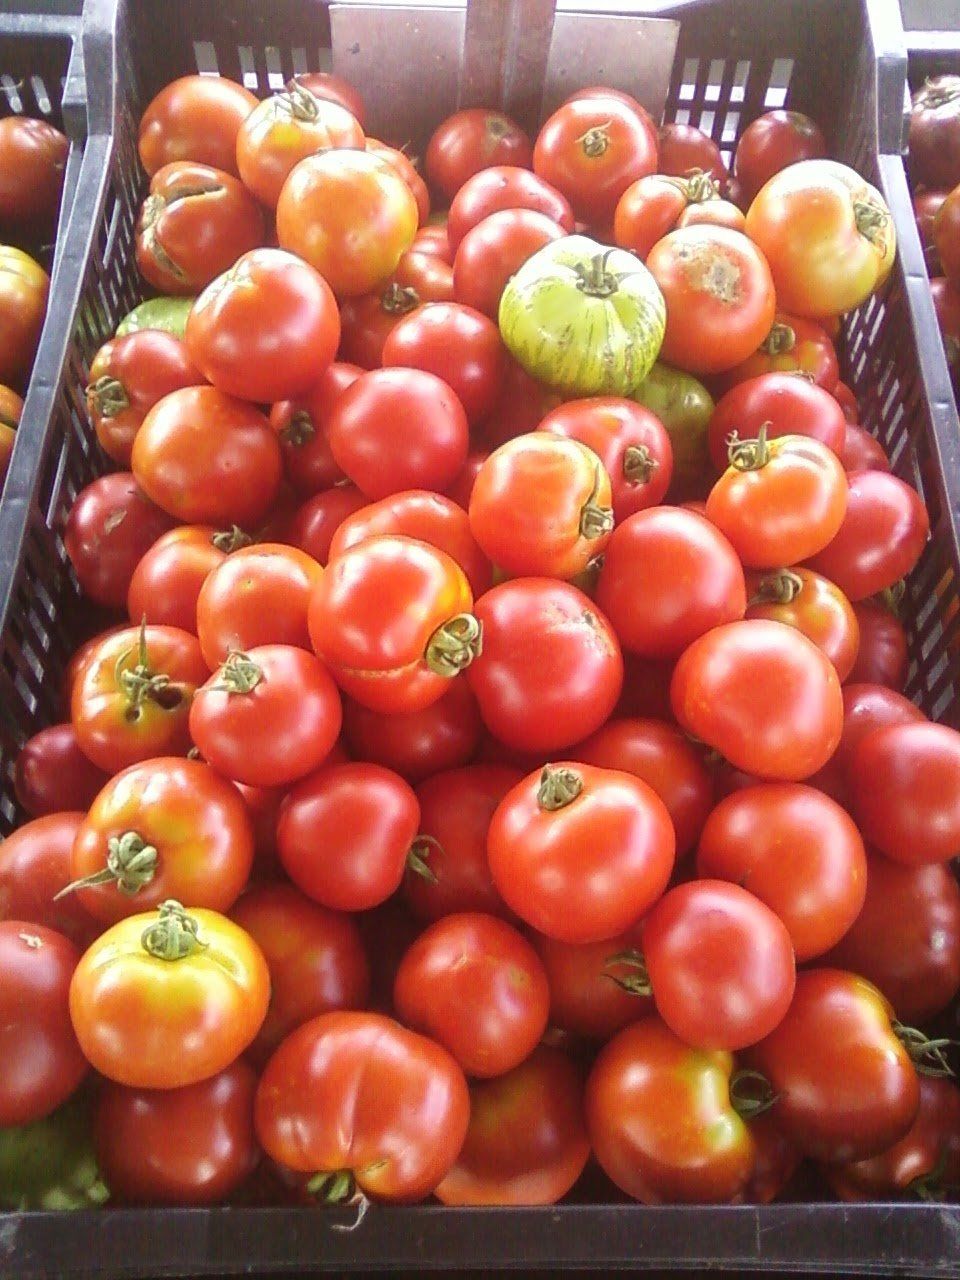 Pop-up Tomato sale for August 24, 2021